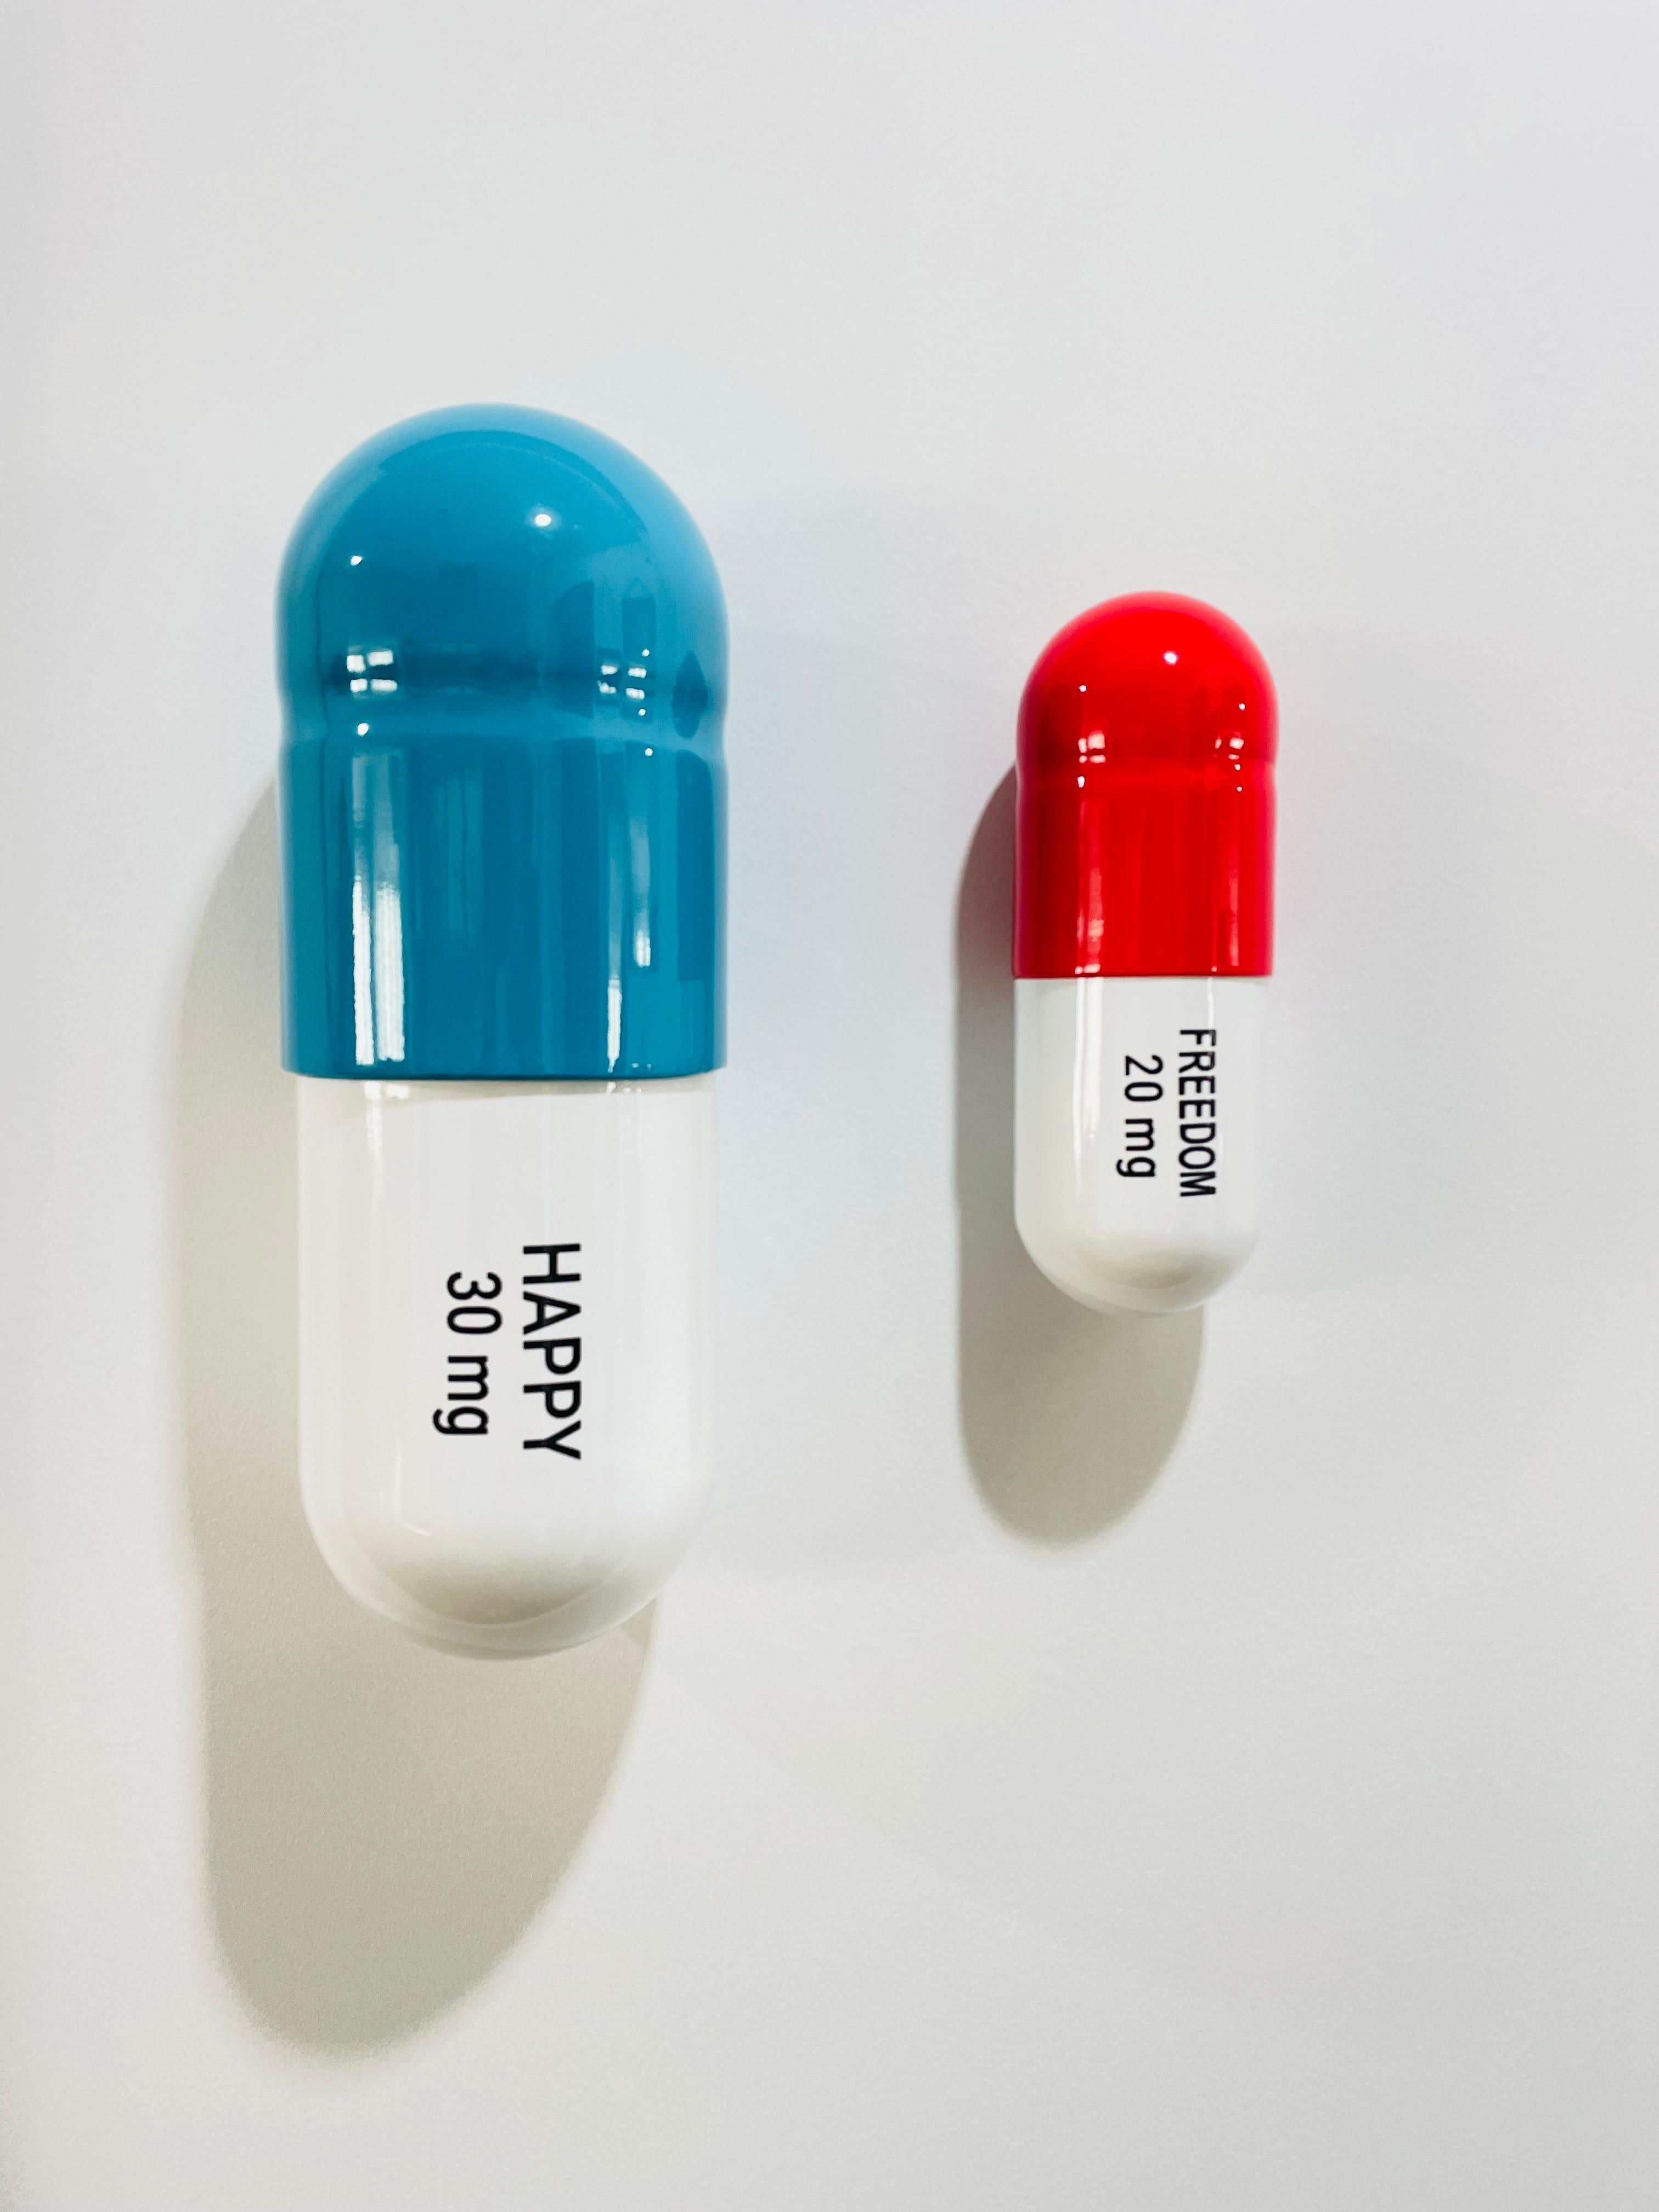 30 MG Happy 20 MG freedom pill Combo (red, turquoise) - figurative sculpture - Sculpture by Tal Nehoray